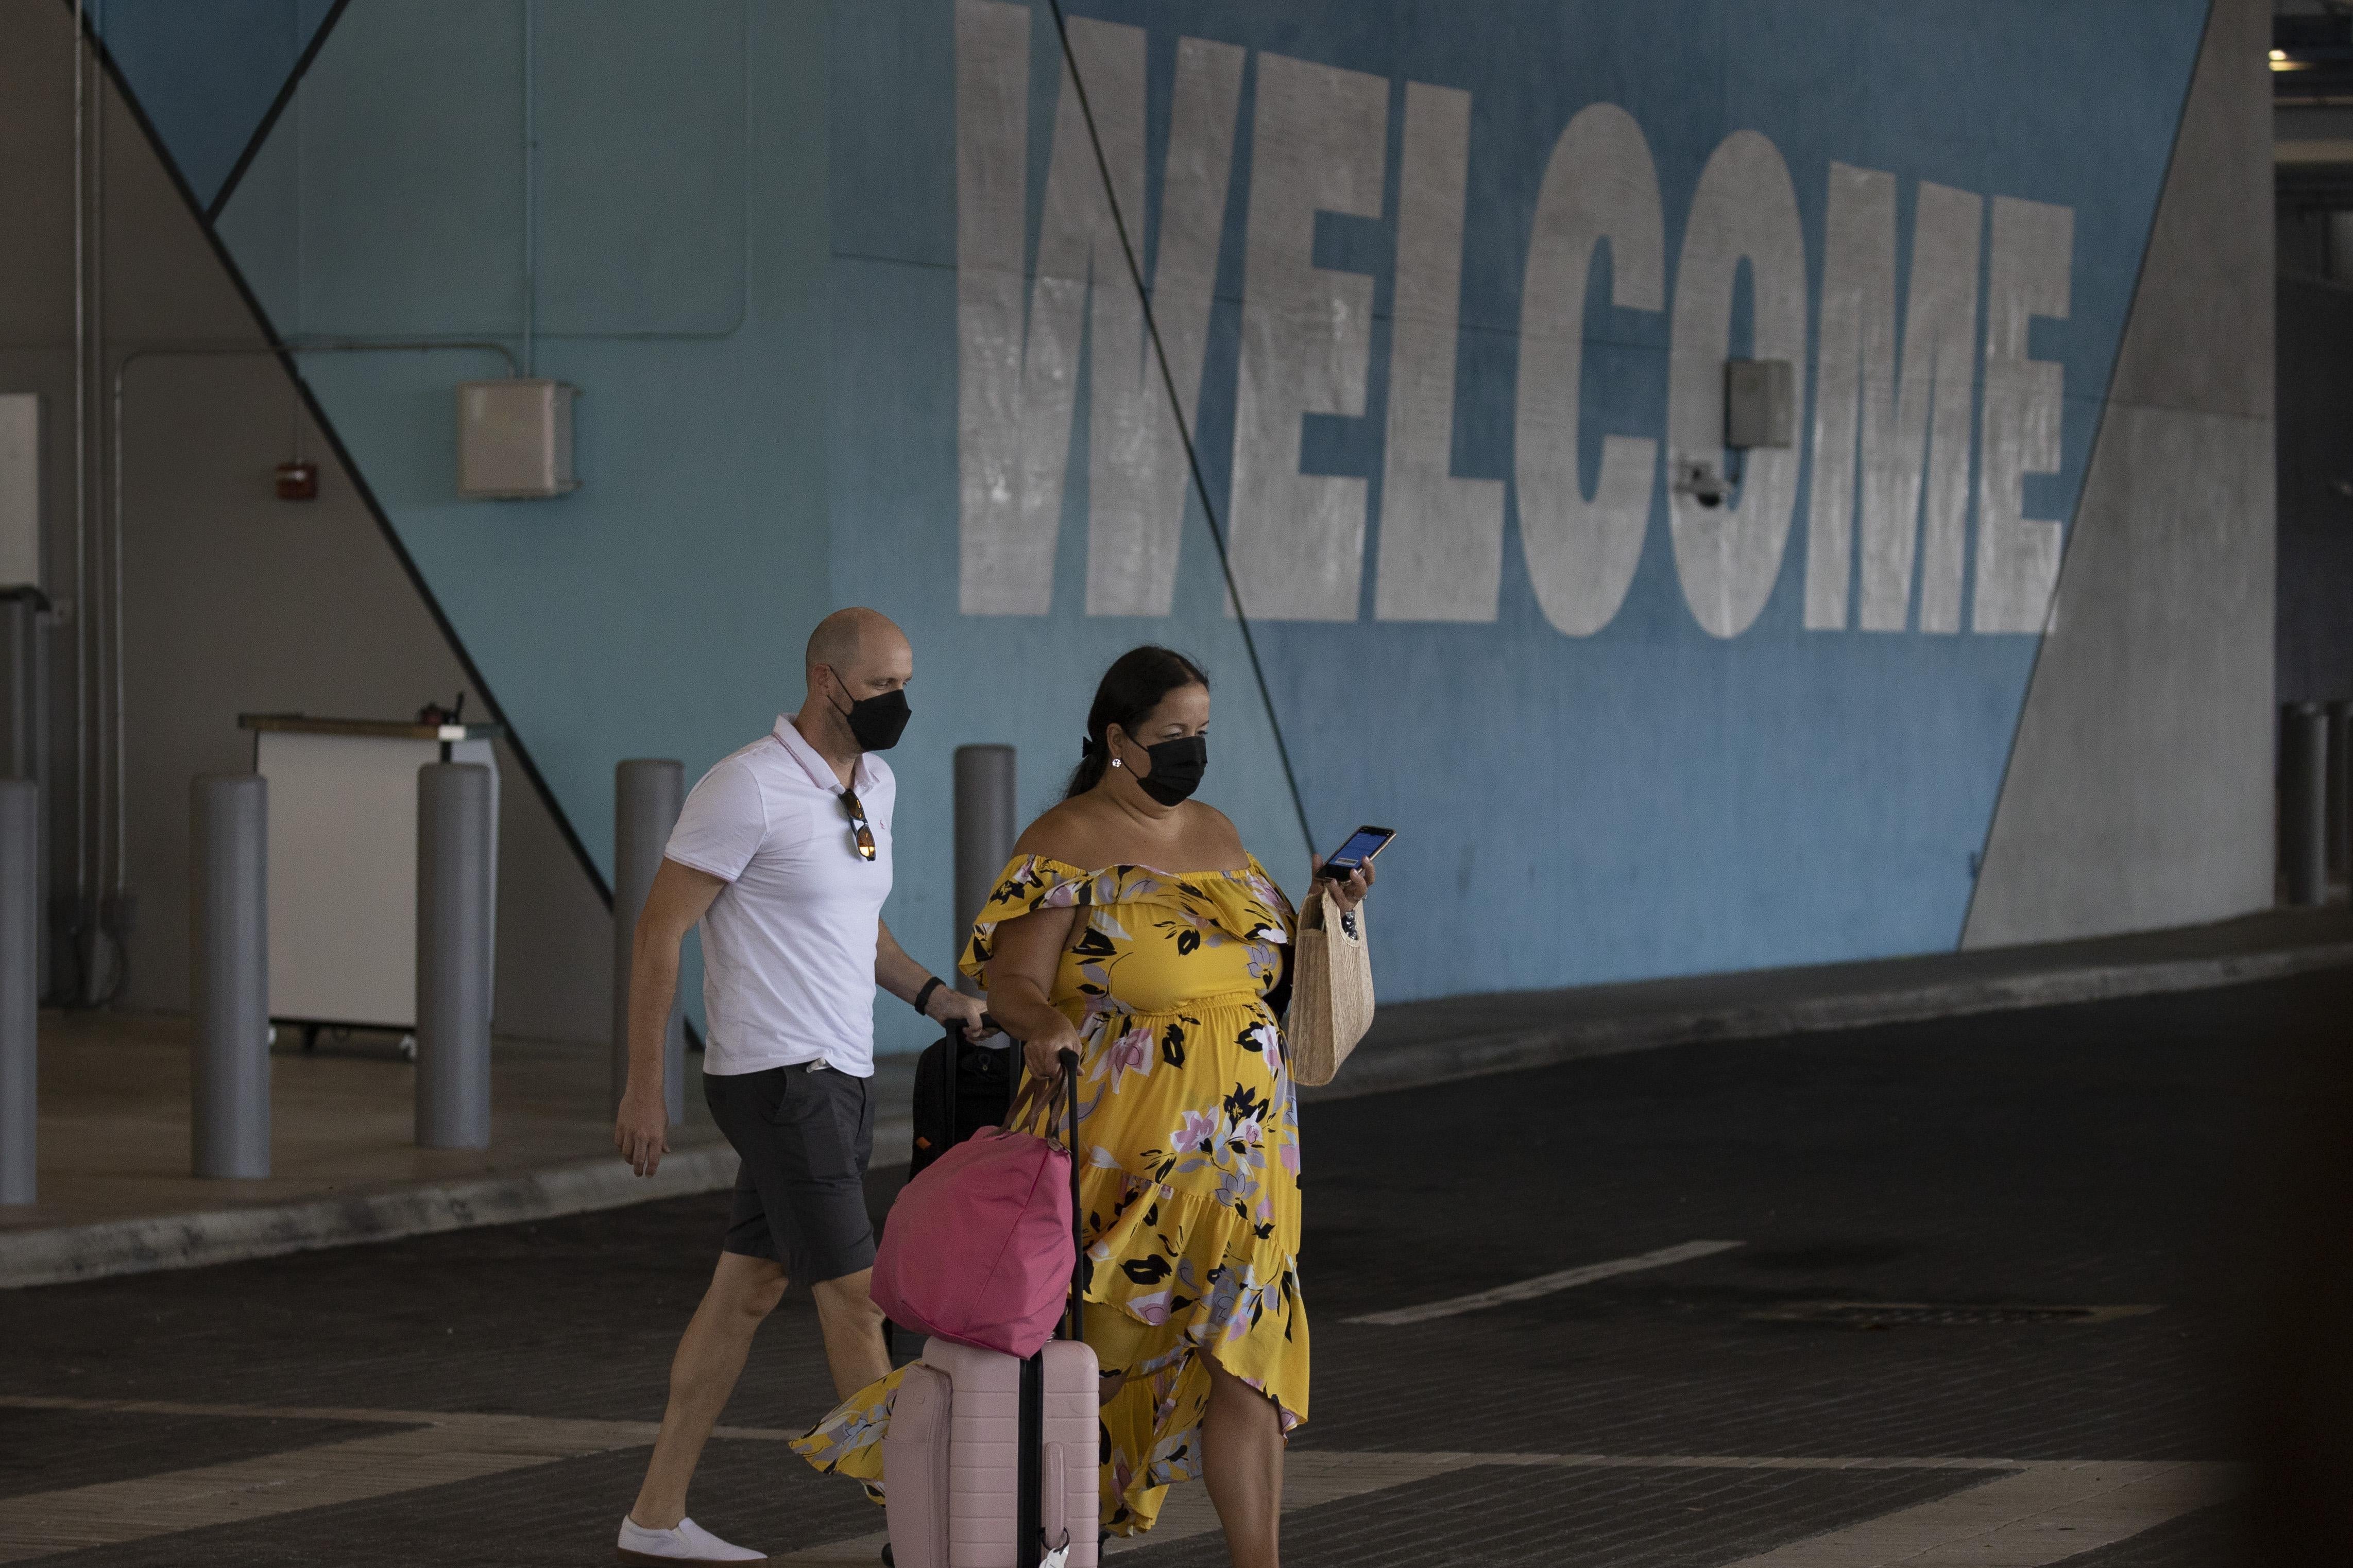 Passengers arrive as Royal Caribbean International prepares to sail the Freedom of the Seas from PortMiami during the first U.S. trial cruise testing COVID-19 protocols on June 20, 2021 in Miami, Florida.